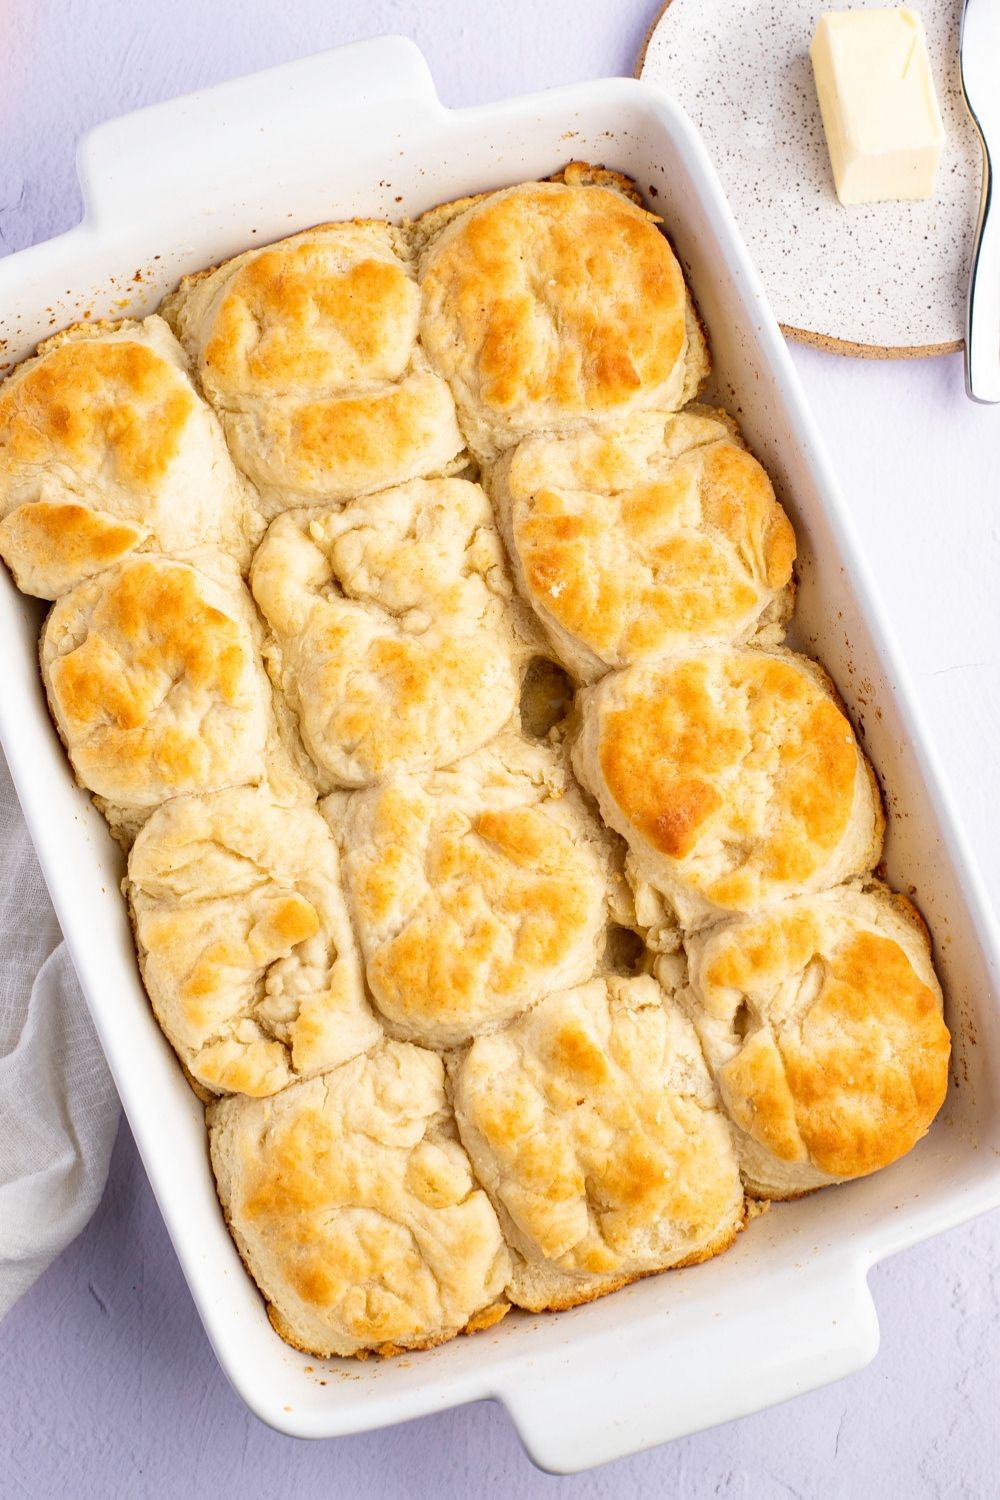 Soft and Fluffy 7-Up Biscuits with butter on the side